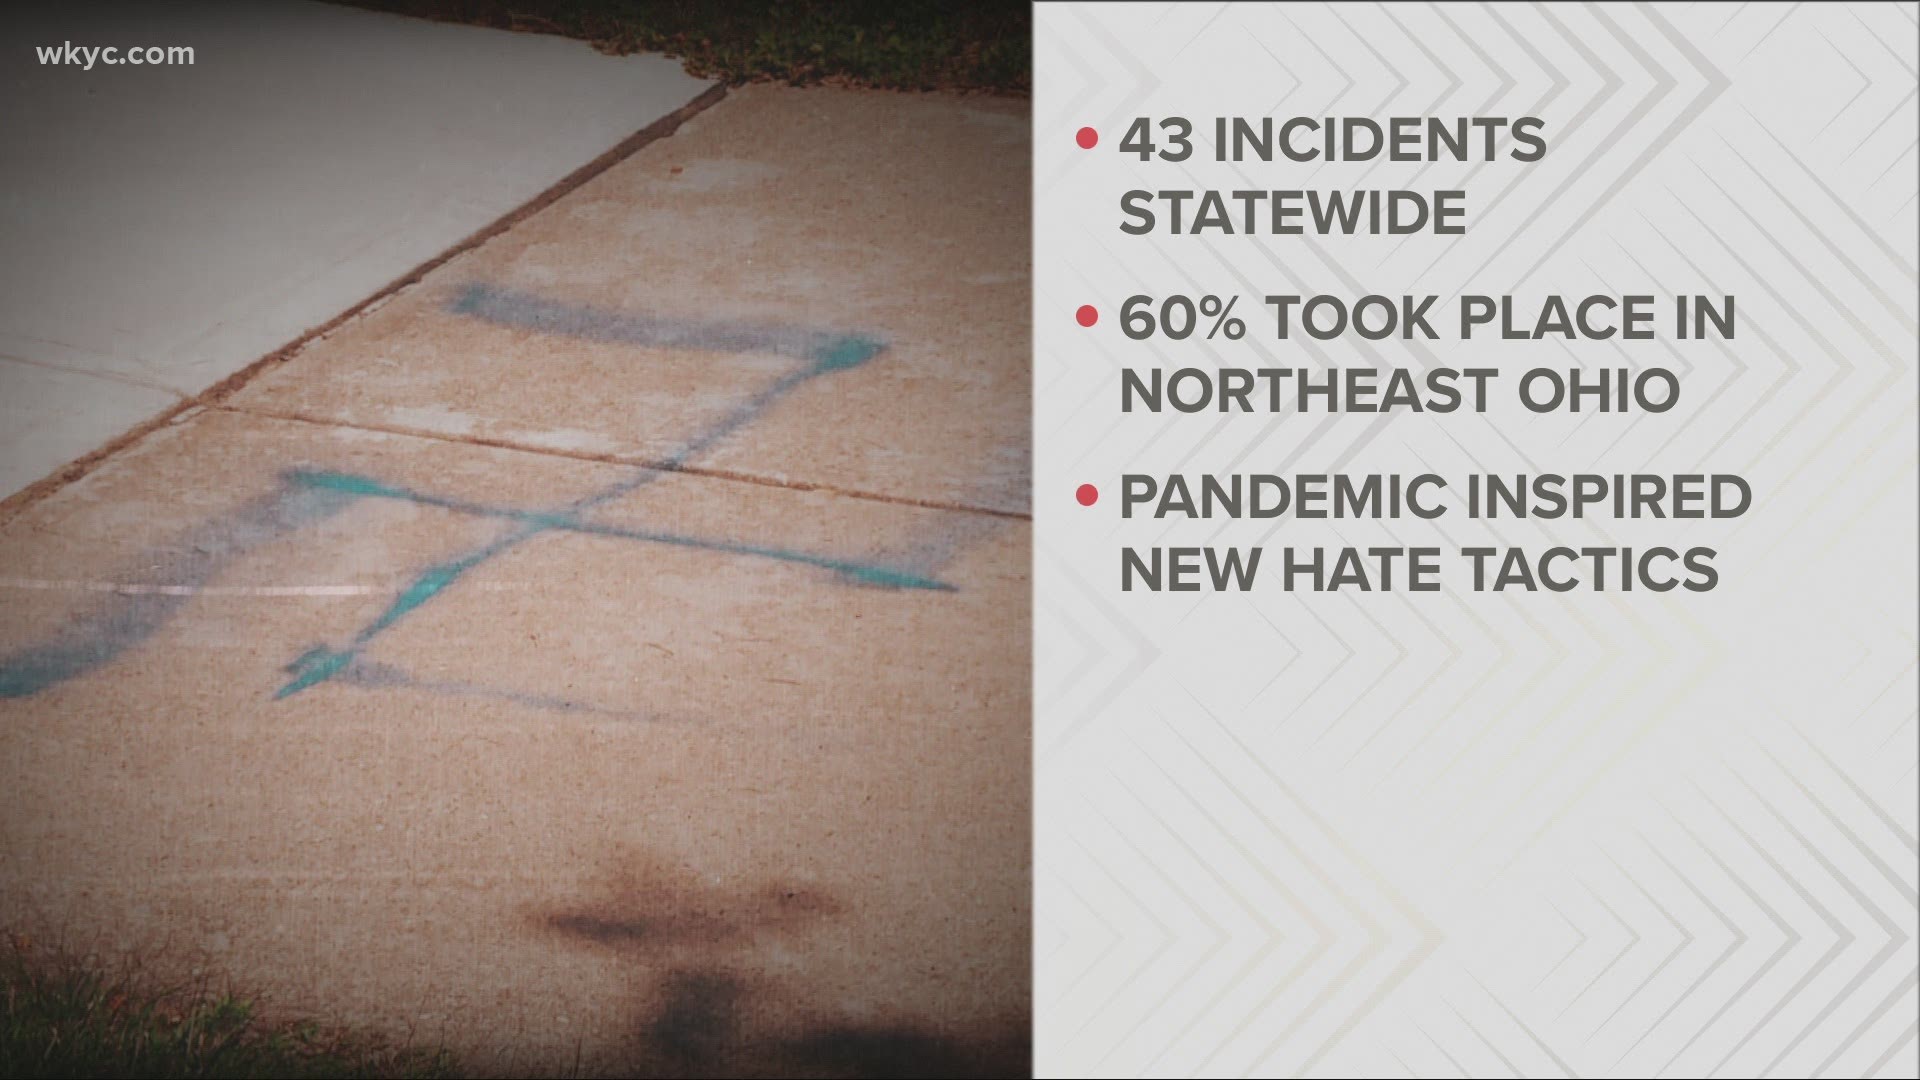 ADL recorded 43 antisemitic incidents in Ohio in its 2020 Audit of Antisemitic Incidents. This is up from 25 incidents recorded in 2019 -- a 72 percent increase.